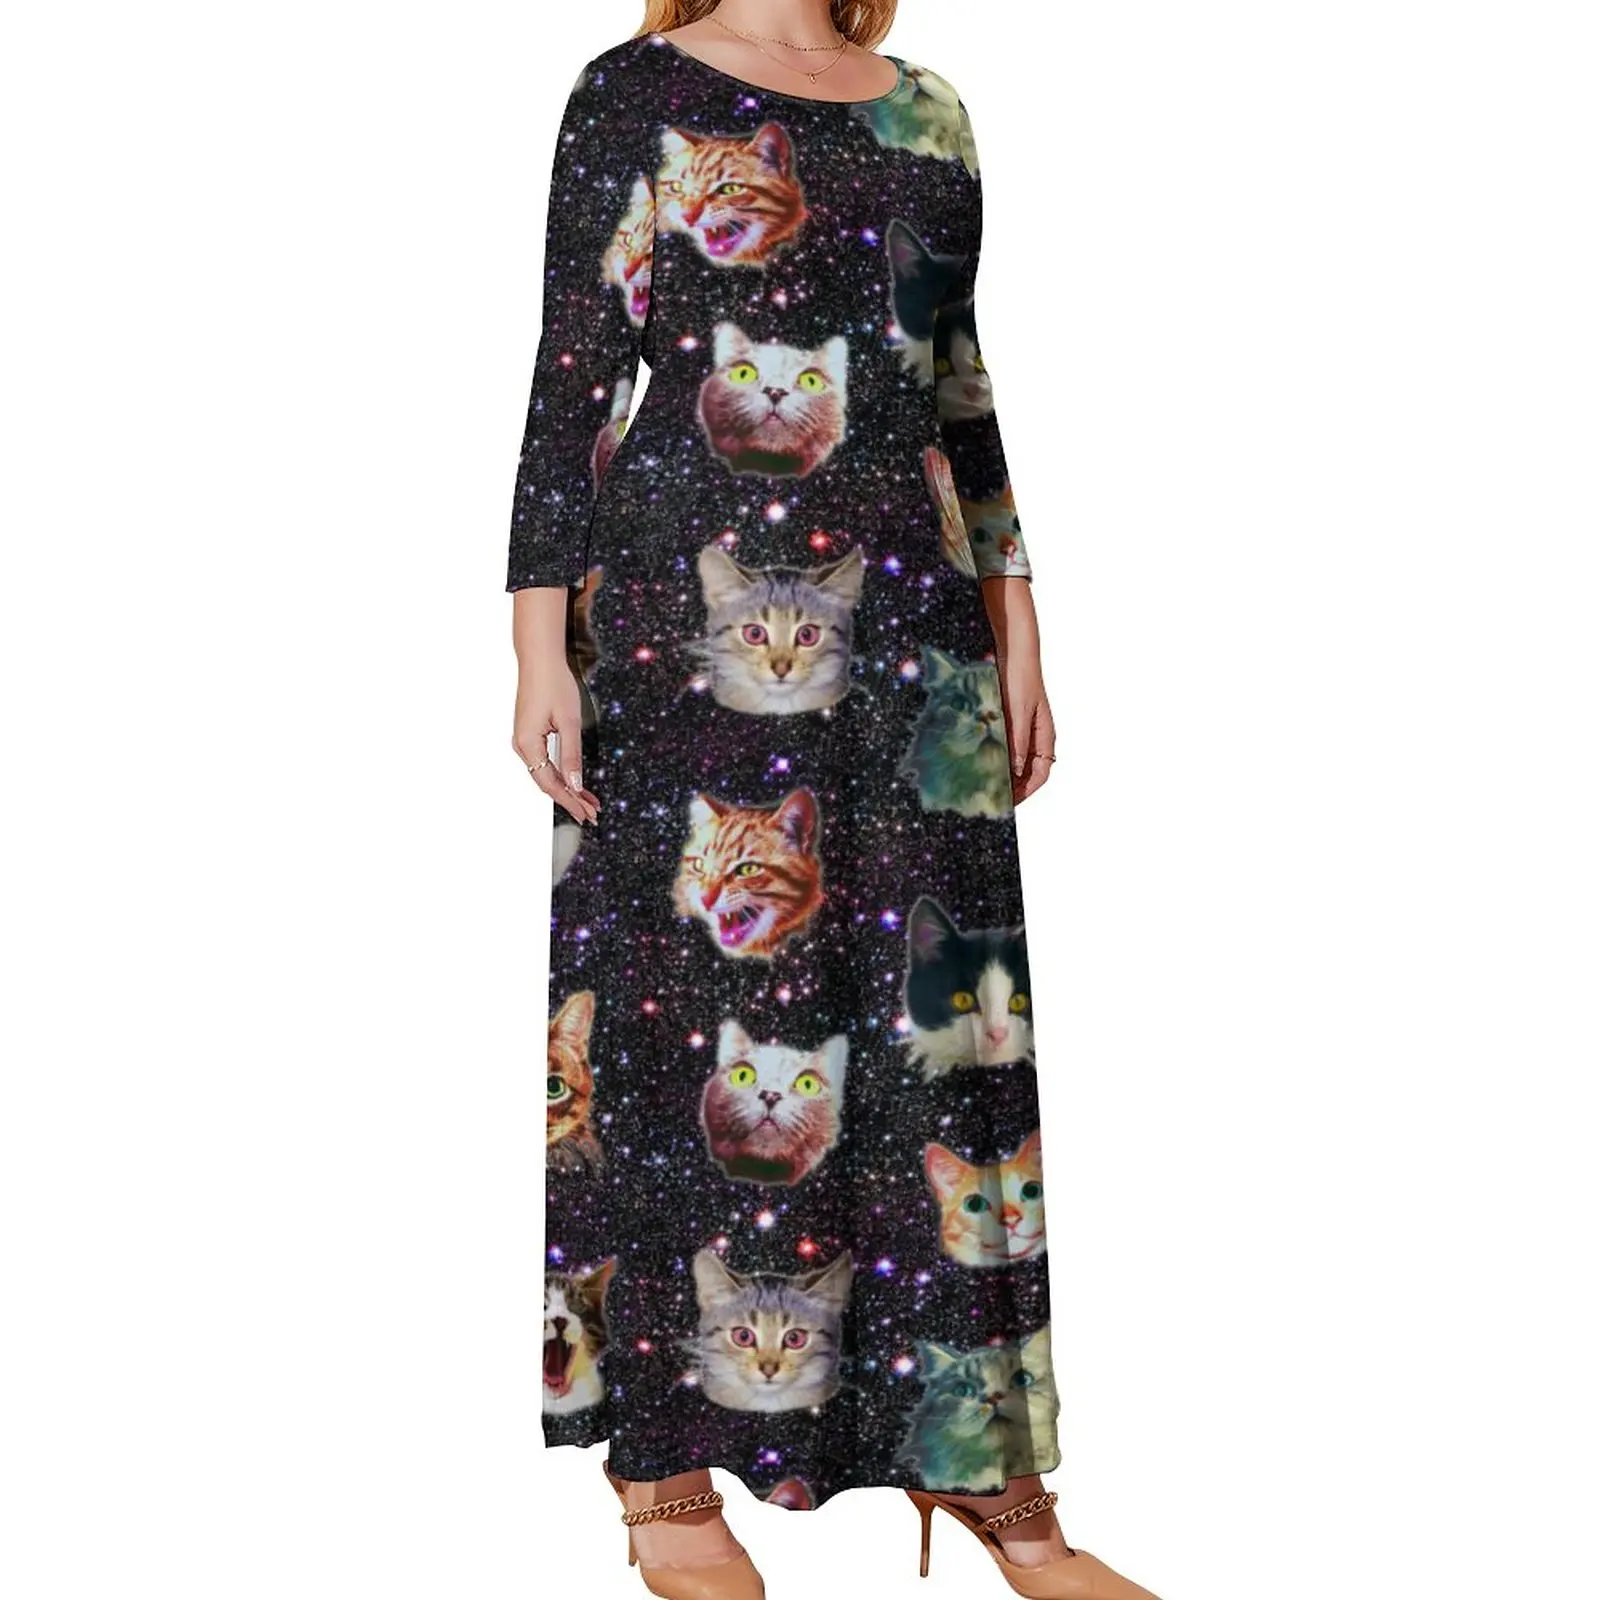 Cats in Outer Space Dress Funny Galaxy Print Vintage Maxi Dress Street Fashion Bohemia Long Dresses Graphic Vestido Plus Size